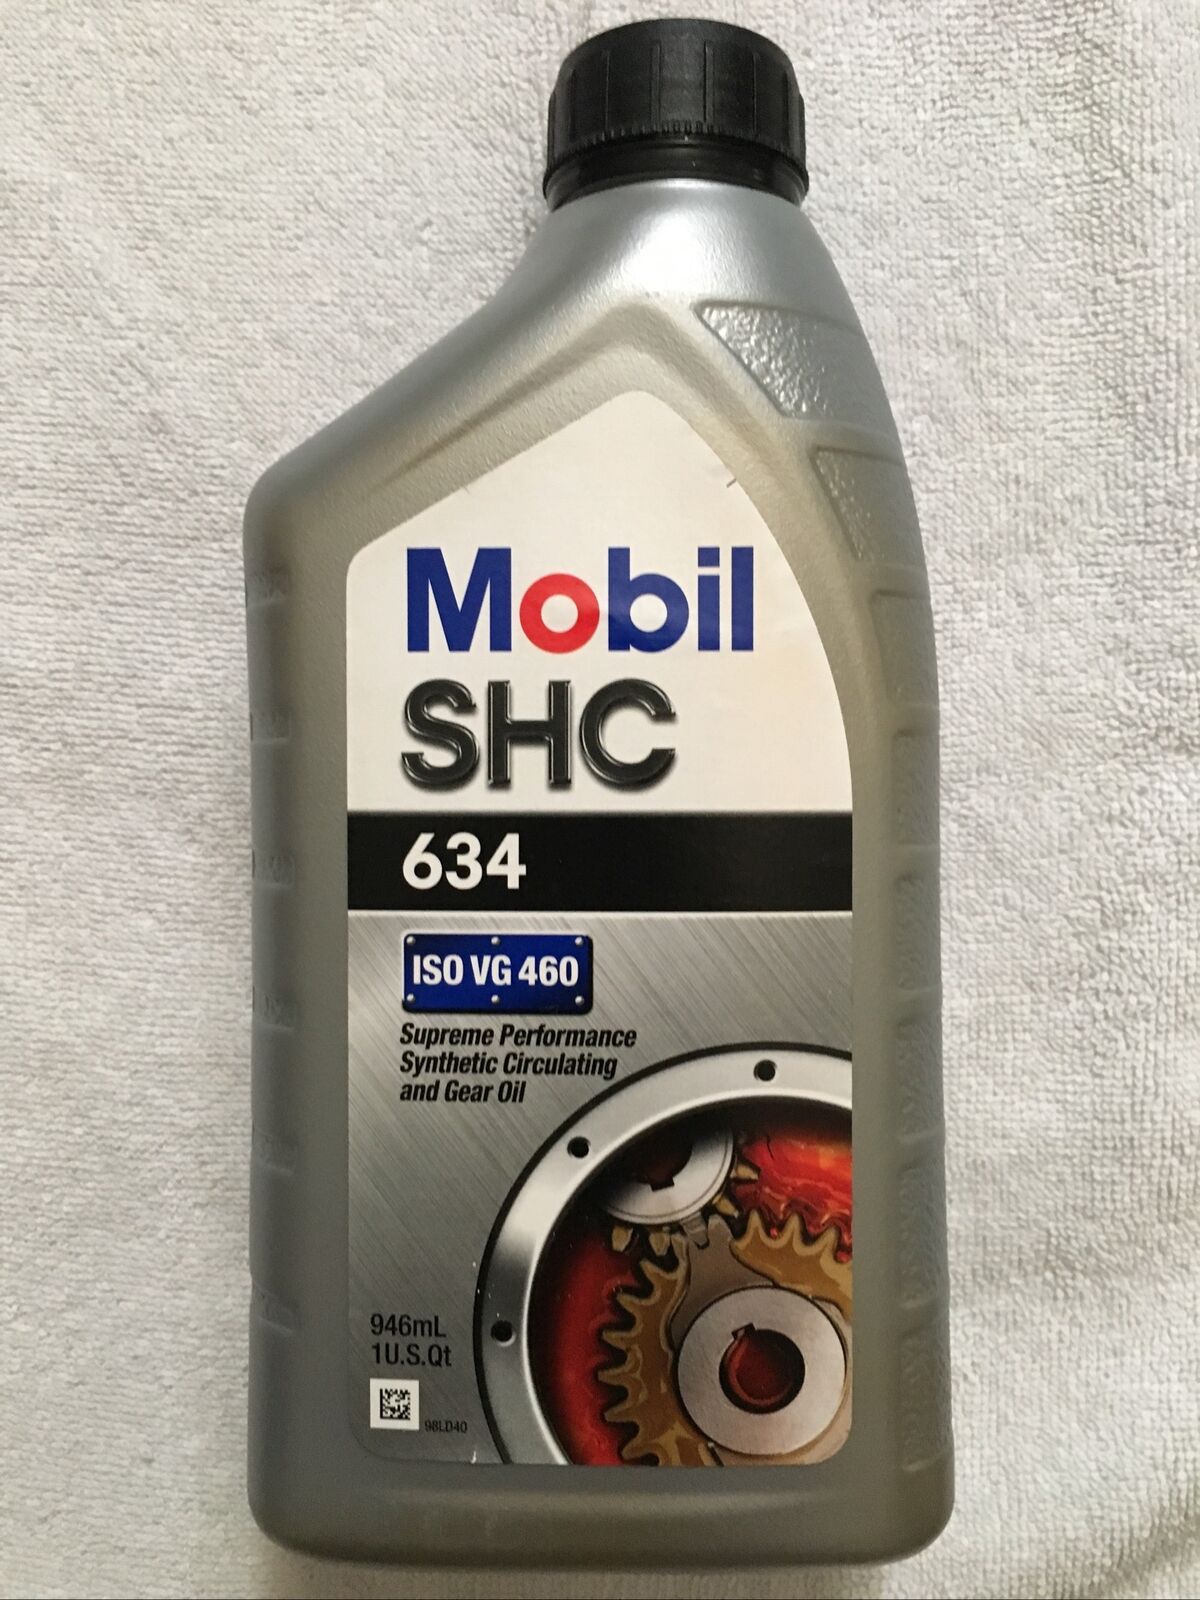 1 QT Mobil SHC 634 Synthetic Circulating Gear Oil ISO 460 8qt’s Available!